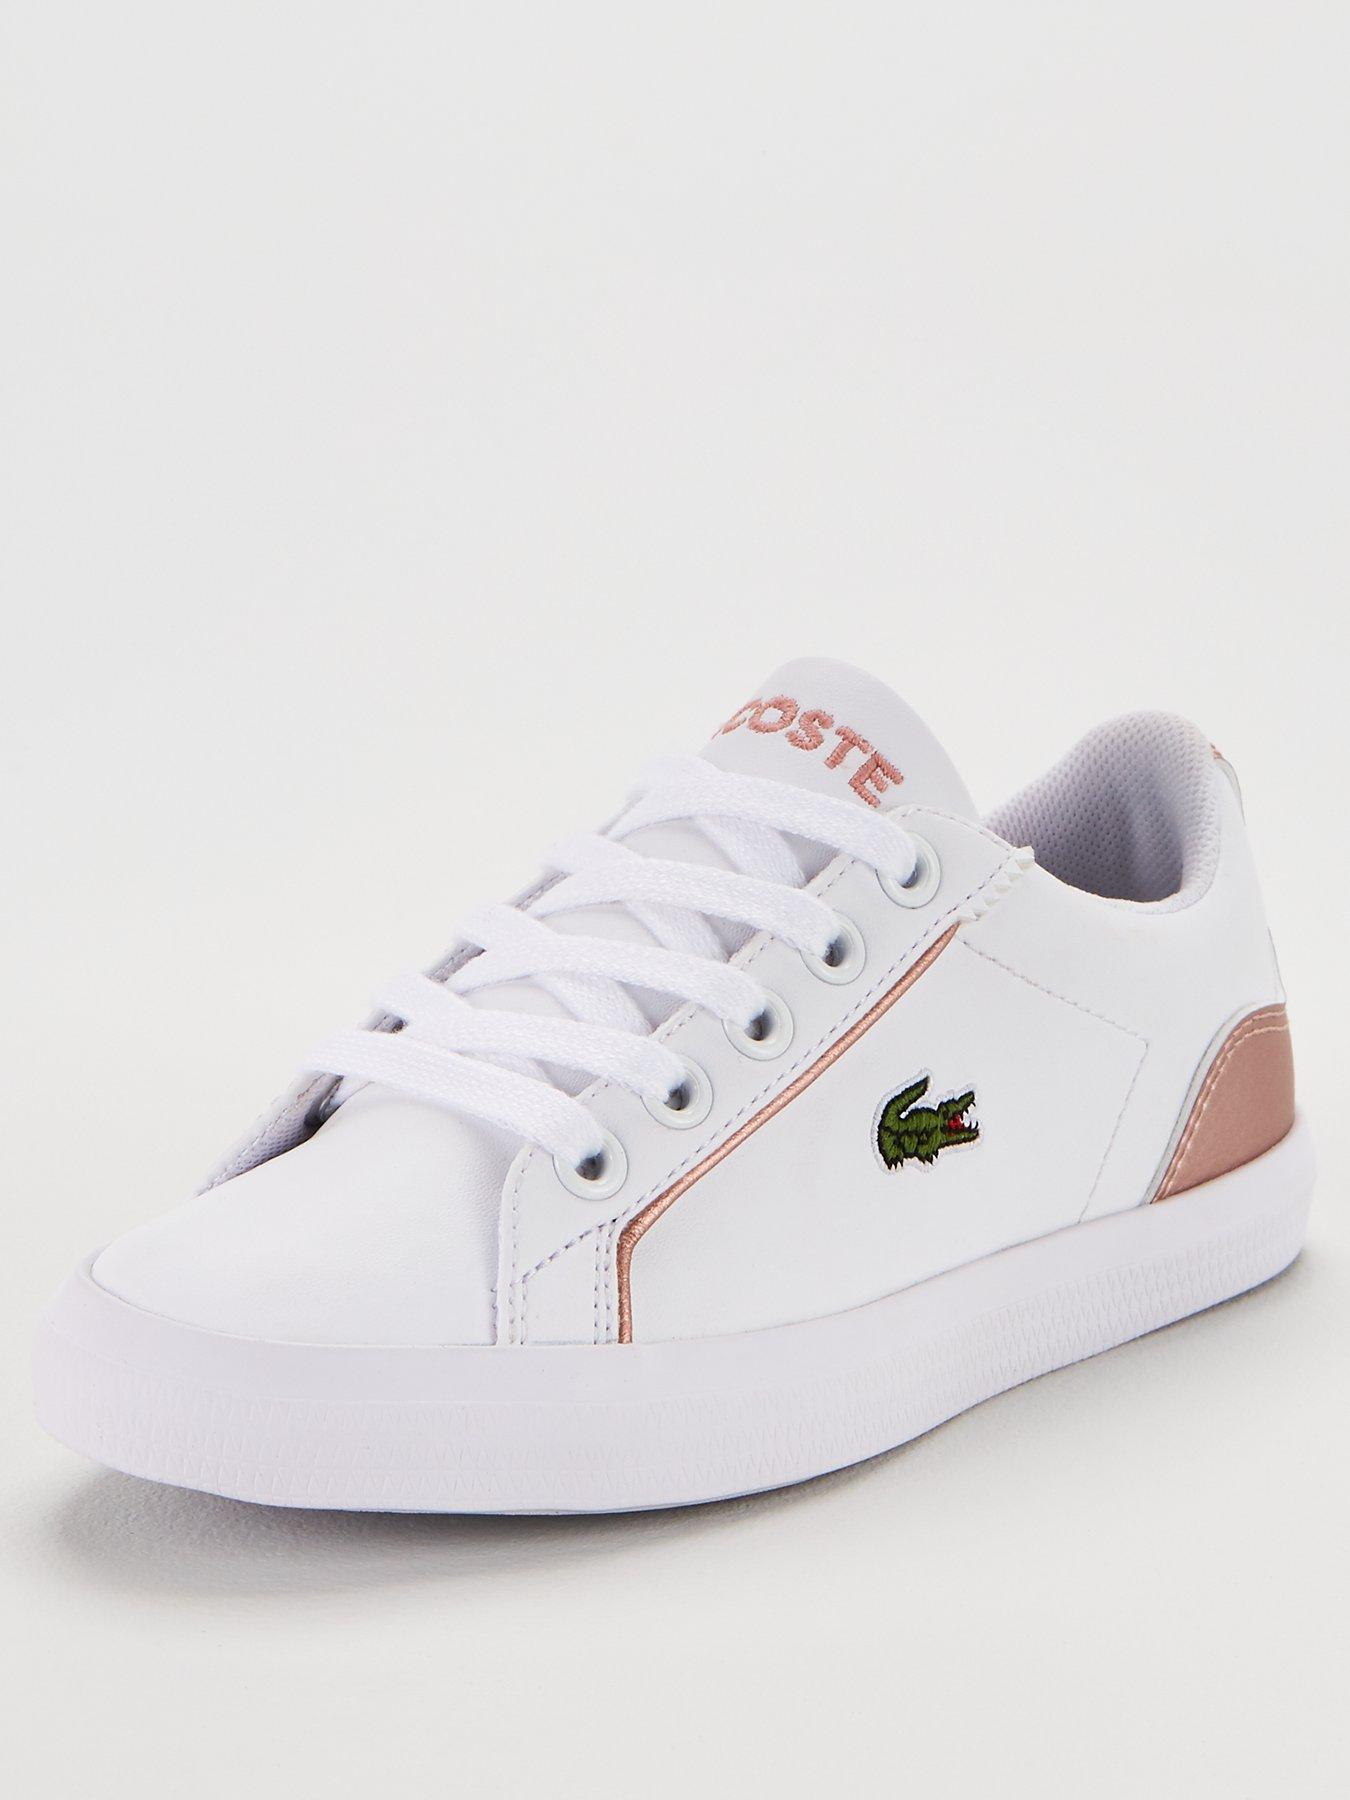 lacoste lerond rose gold